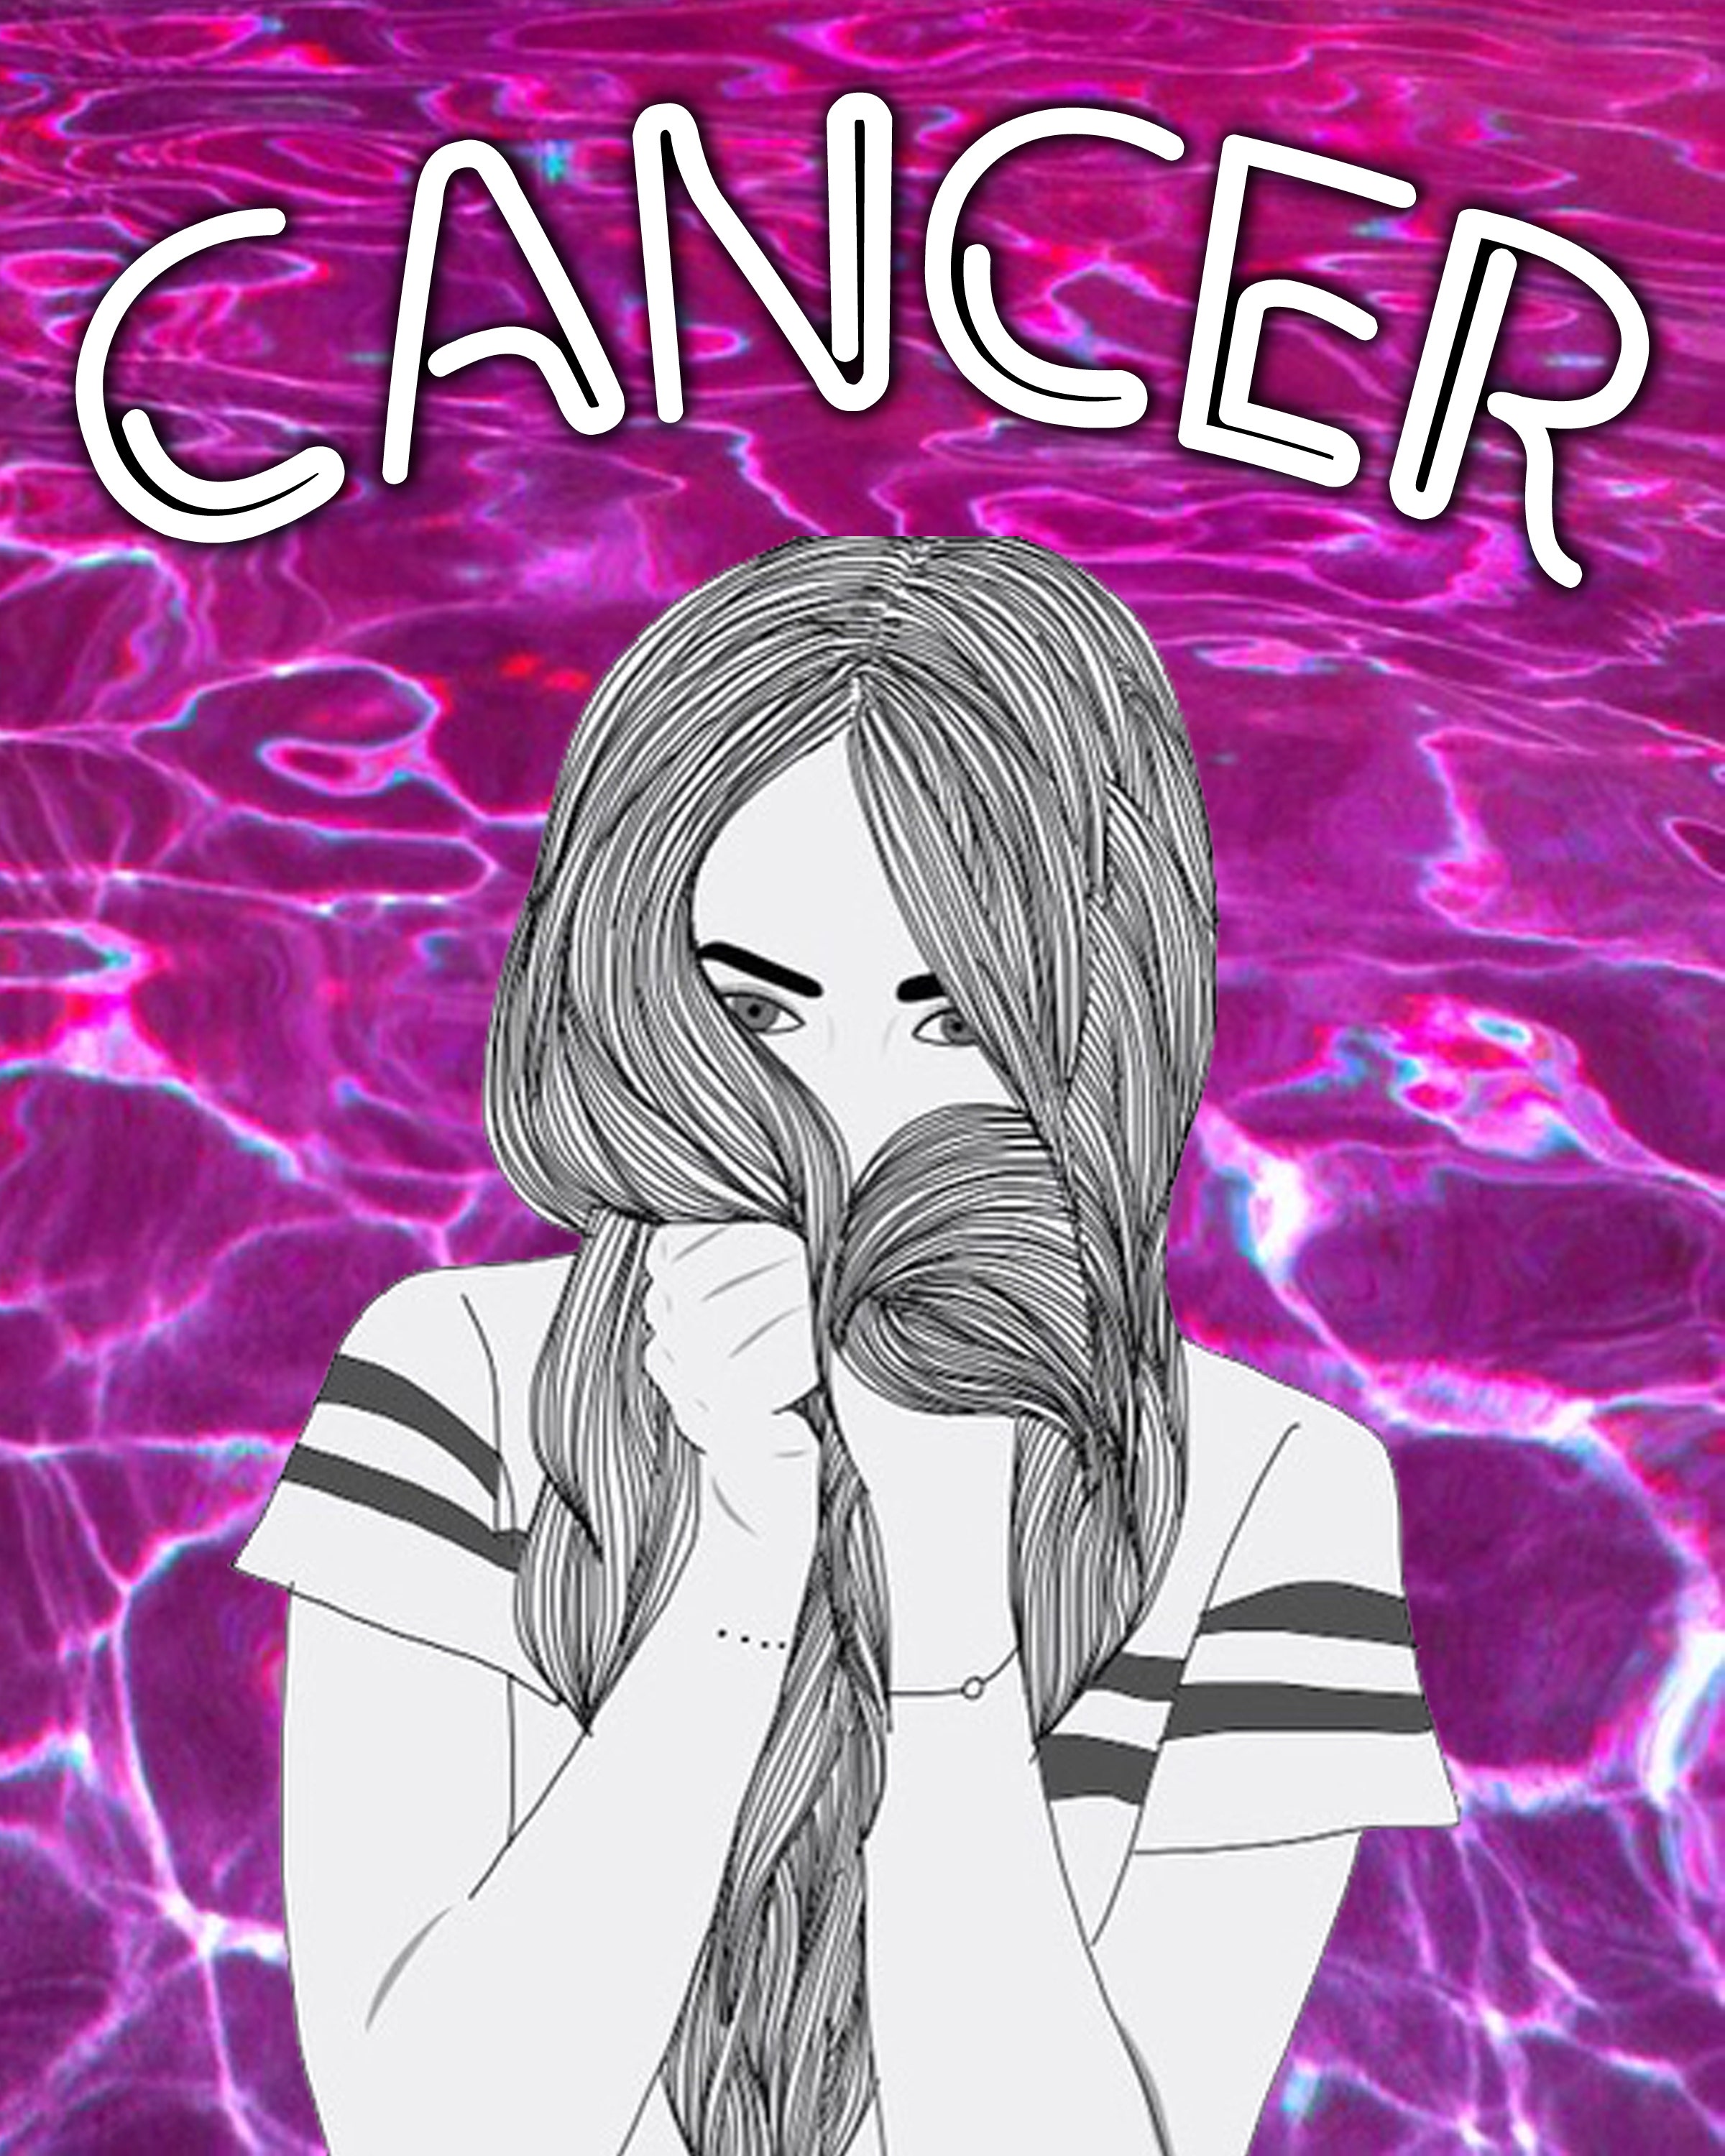 cancer bad habits of each zodiac sign can't kick